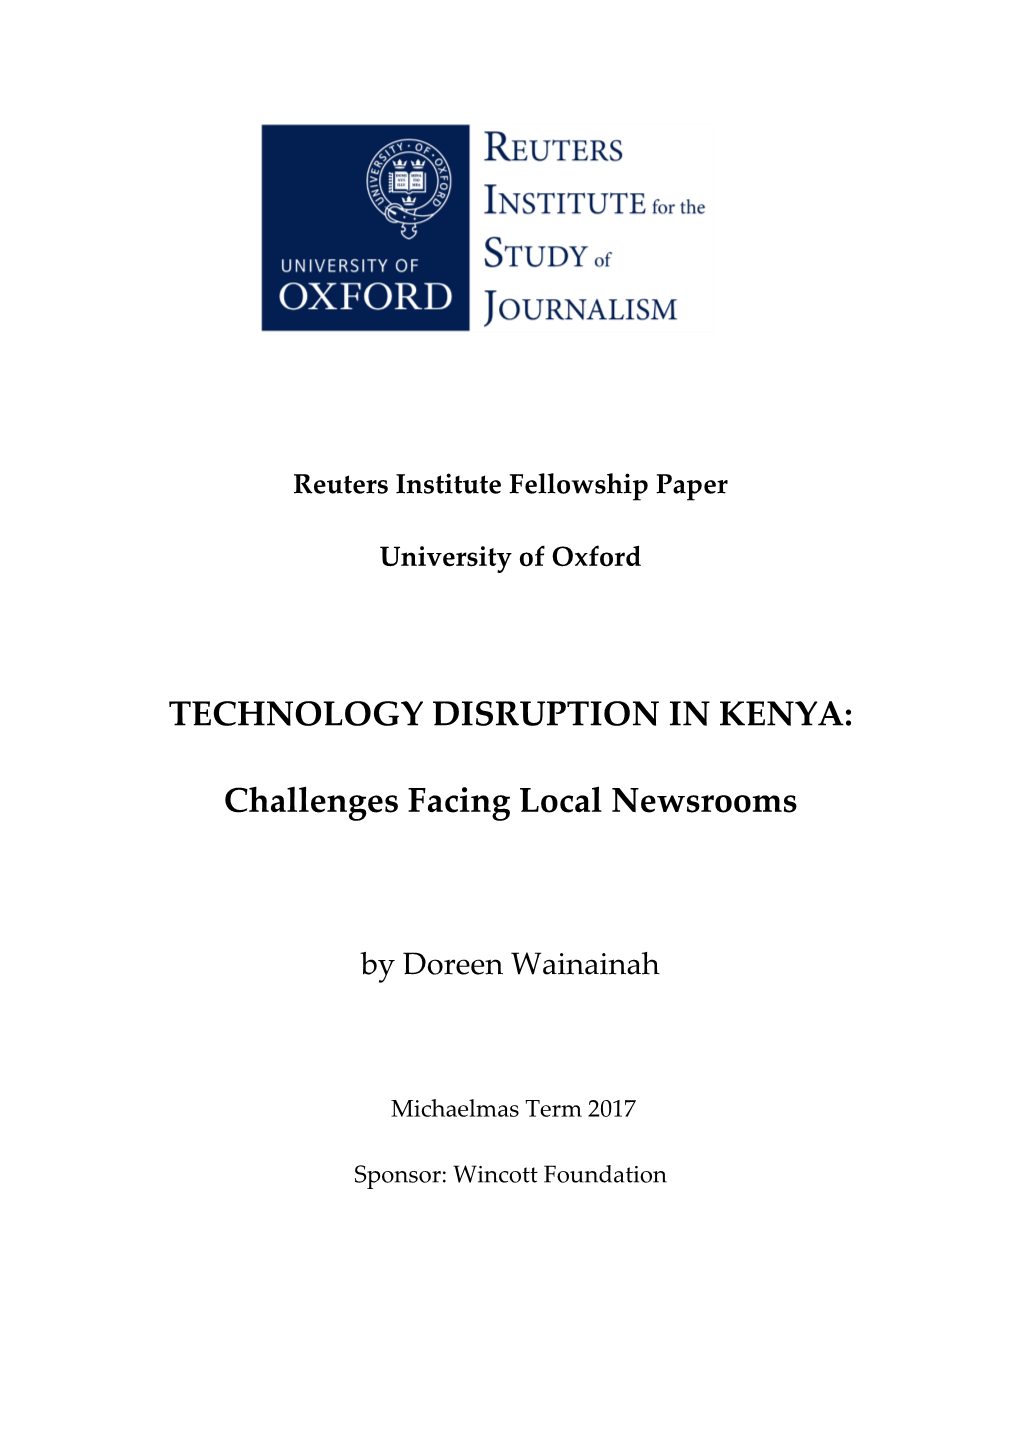 TECHNOLOGY DISRUPTION in KENYA: Challenges Facing Local